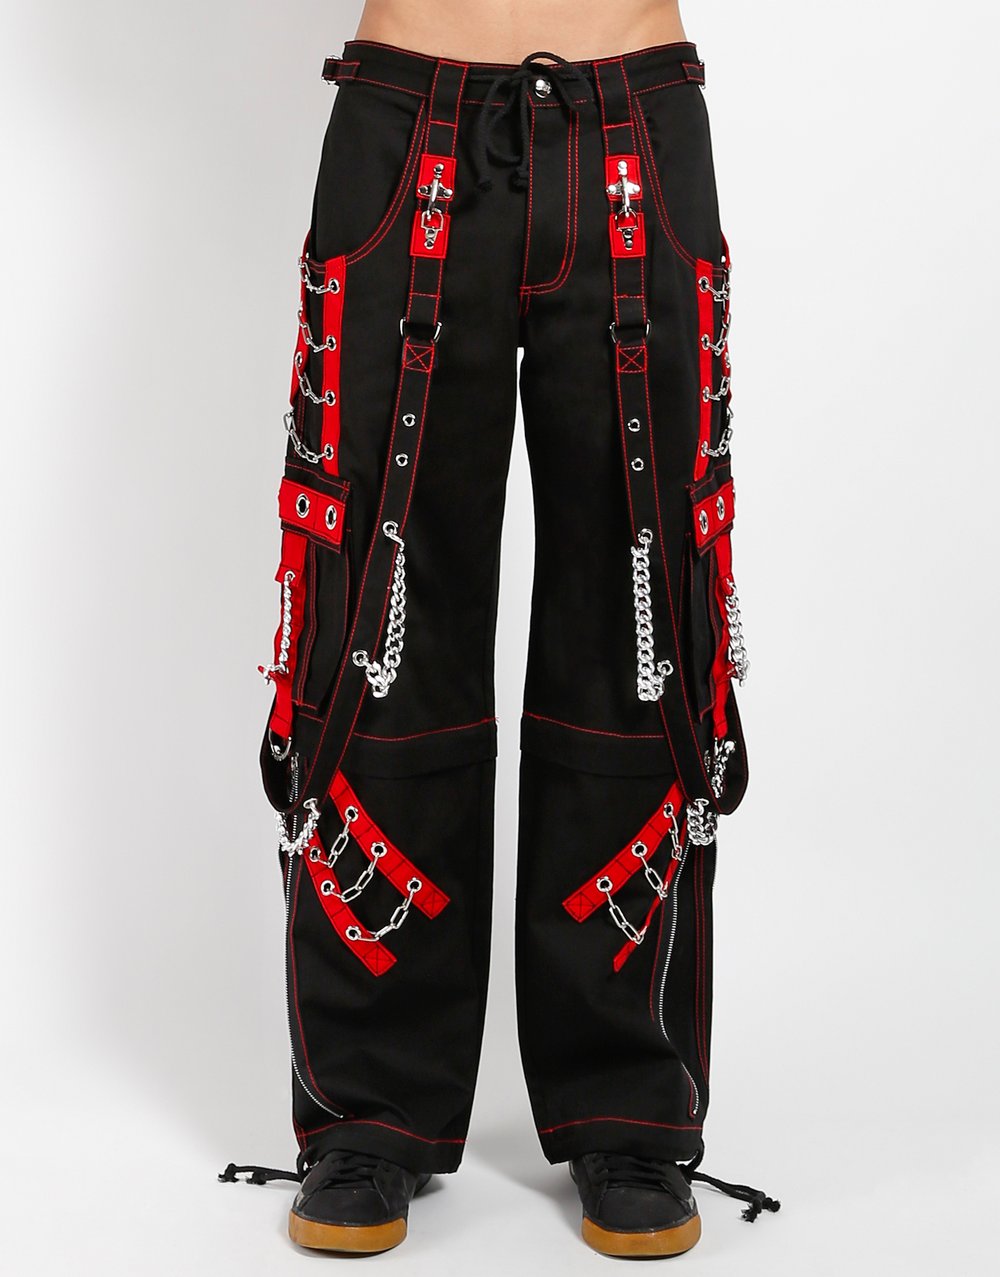 front of Black and red pants feature red stitching, removable straps, adjustable ankles, D-rings, clasps, and deep pockets.